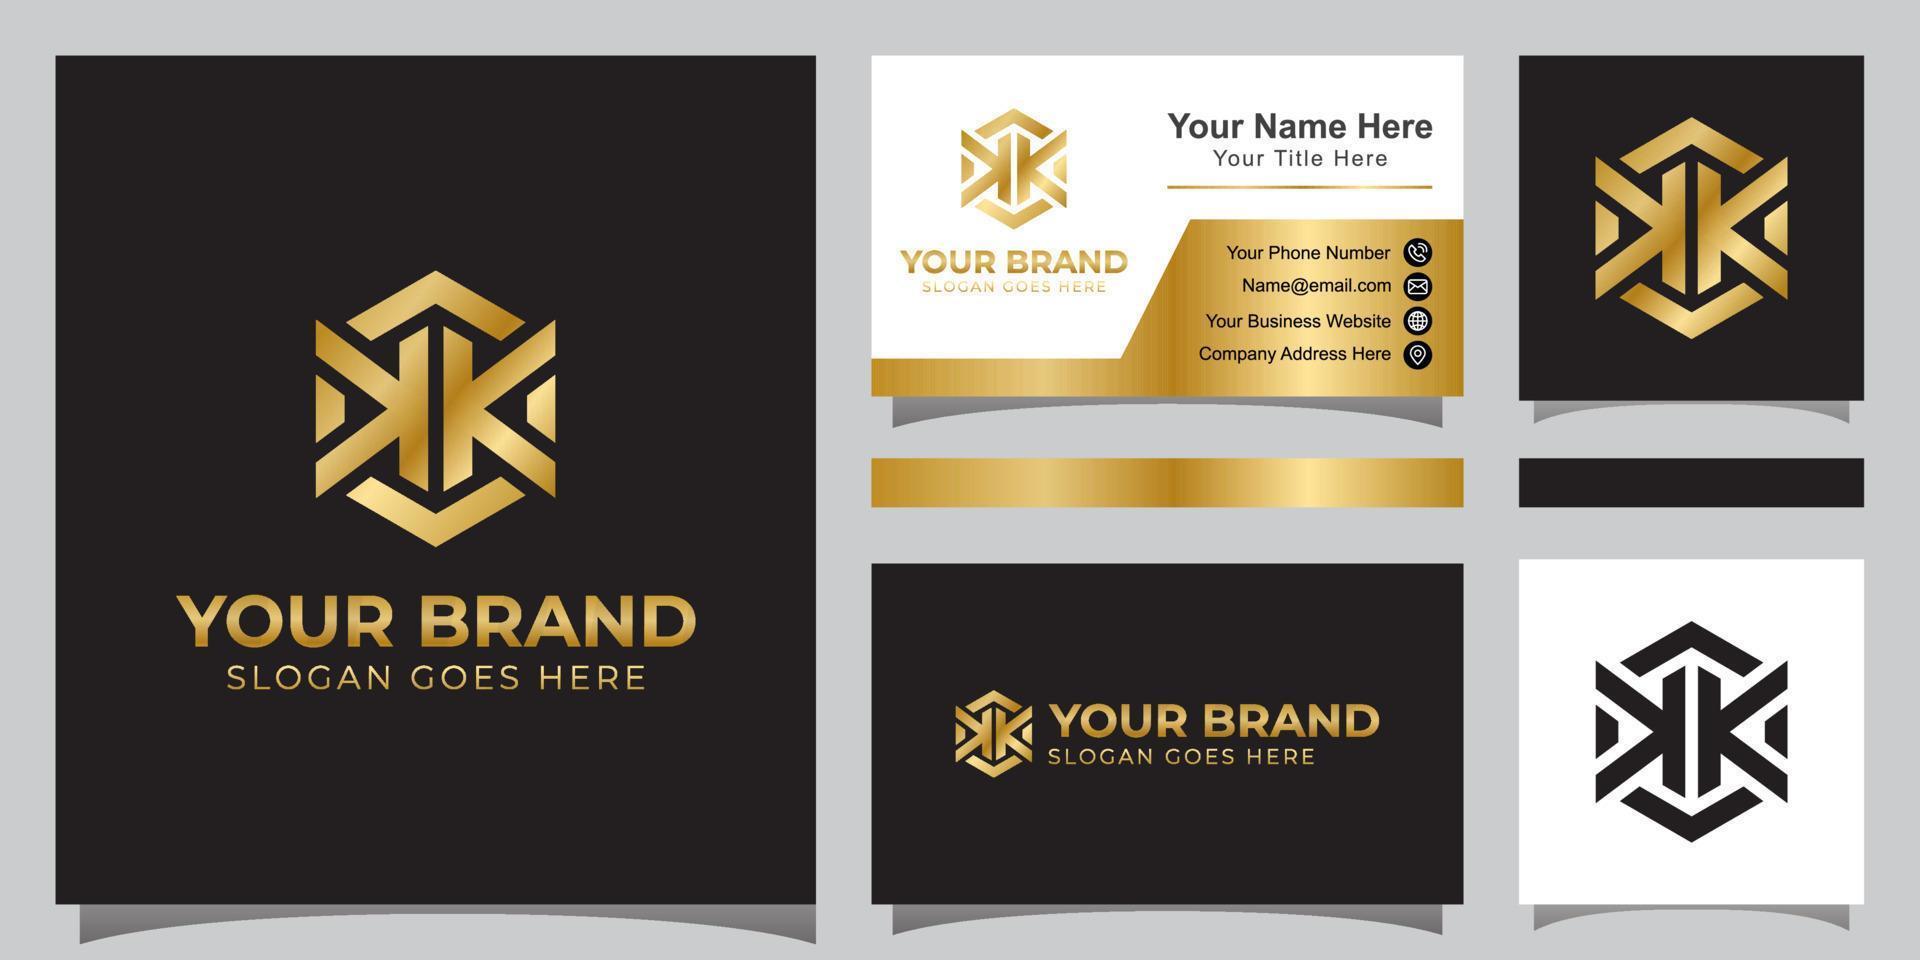 elegant letter double K with hexagonal logo for your business brand and business card vector